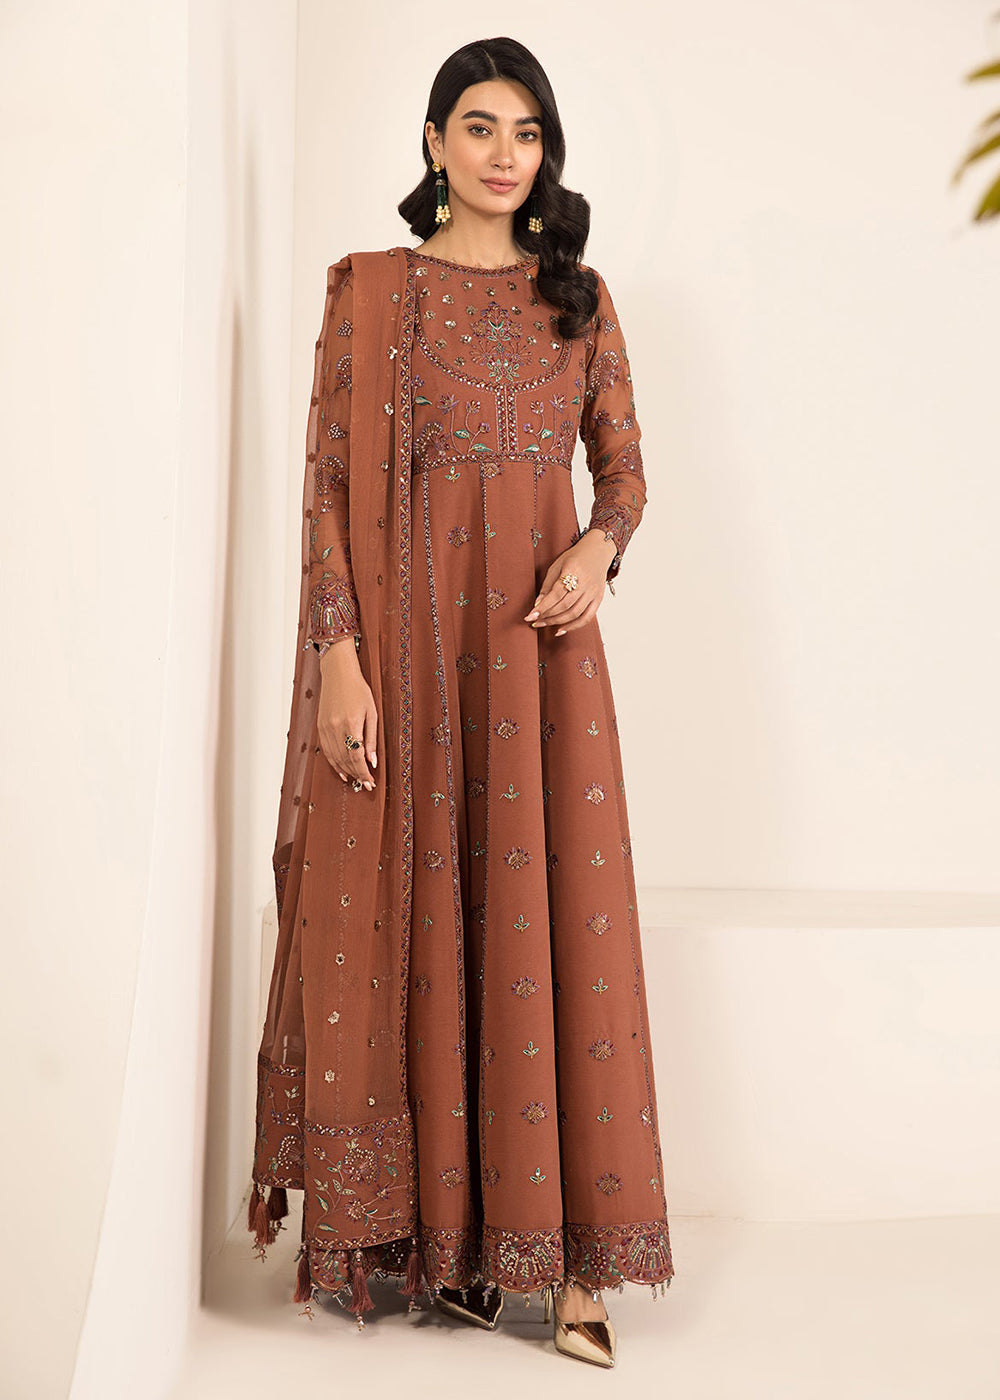 Buy Now Rust Brown Formal Suit - Alizeh - Lamhay Formals '23 - V15D06 - Arzou Online in USA, UK, Canada & Worldwide at Empress Clothing. 